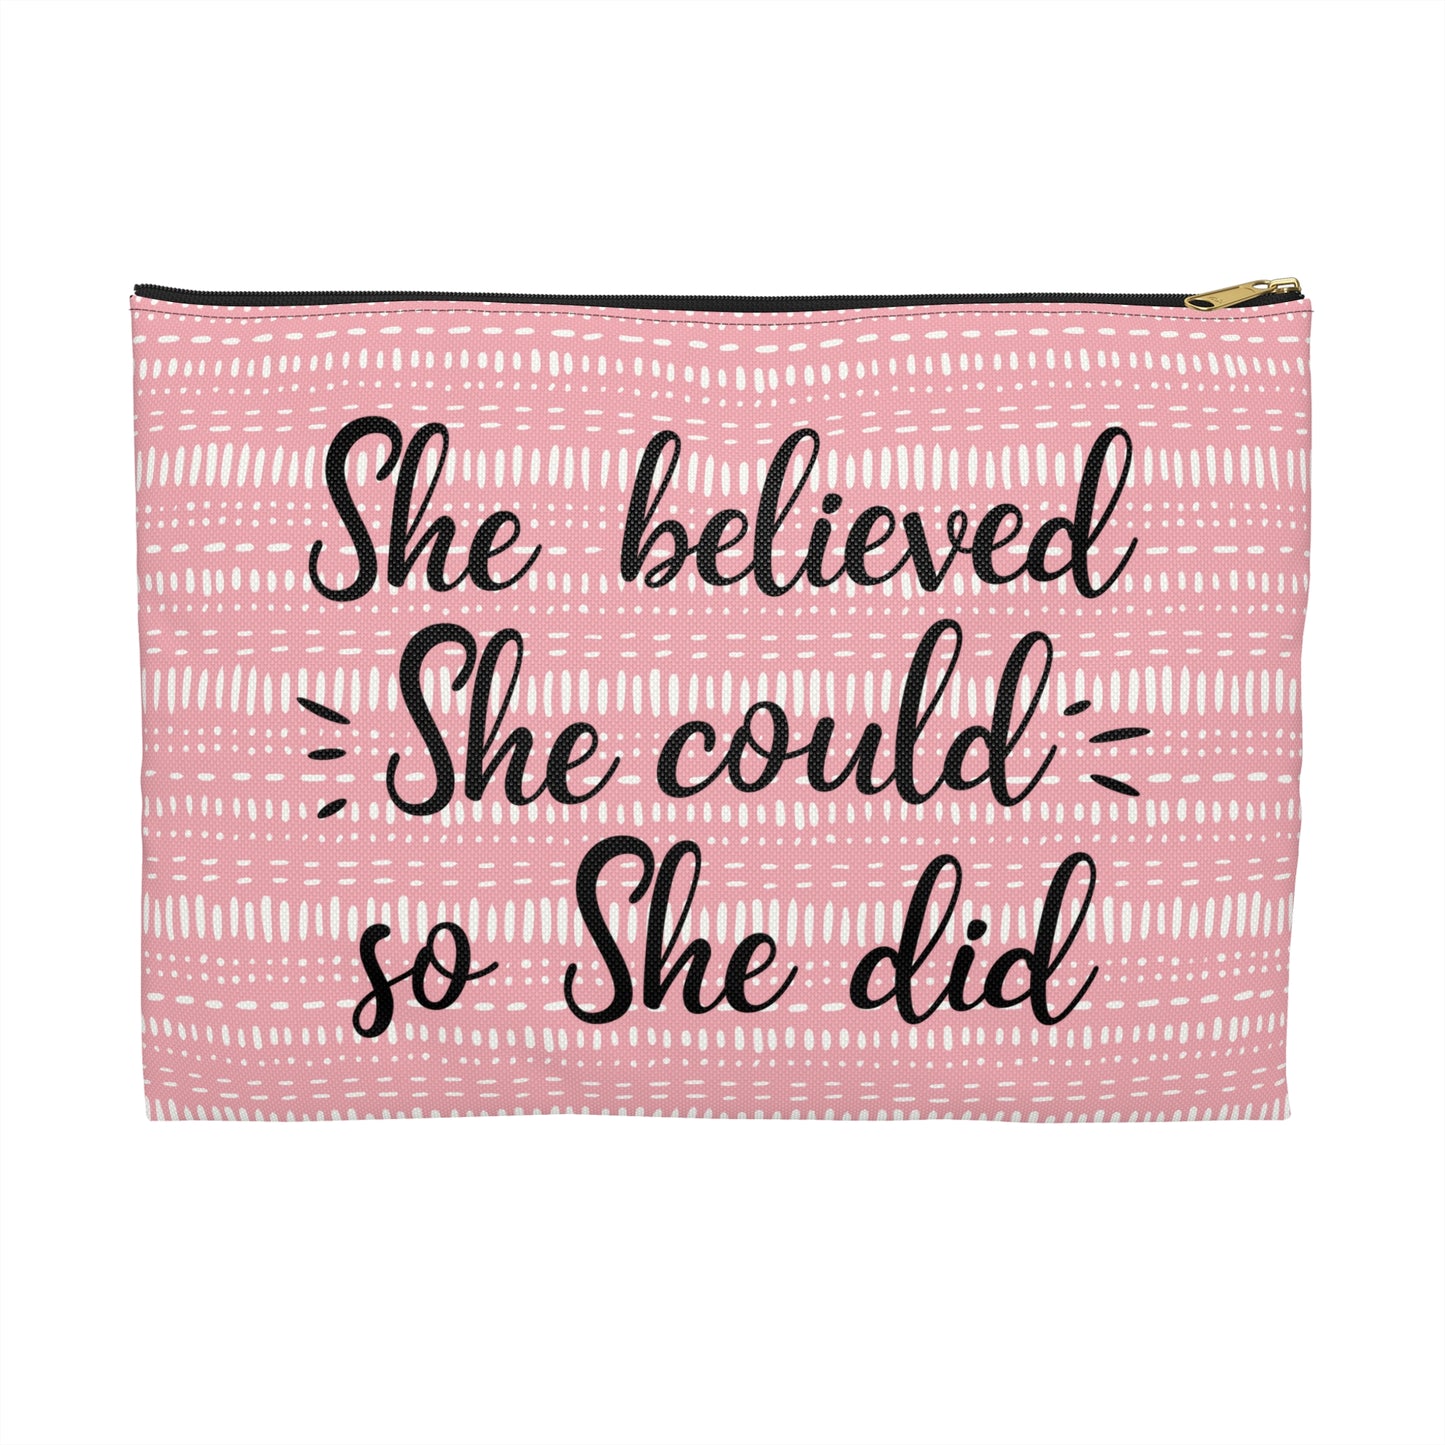 Pink Boho - She Believed She Could So She Did - Inspirational - Accessory Pouch / Makeup Case / Travel Pouch / Pencil case / Art Case